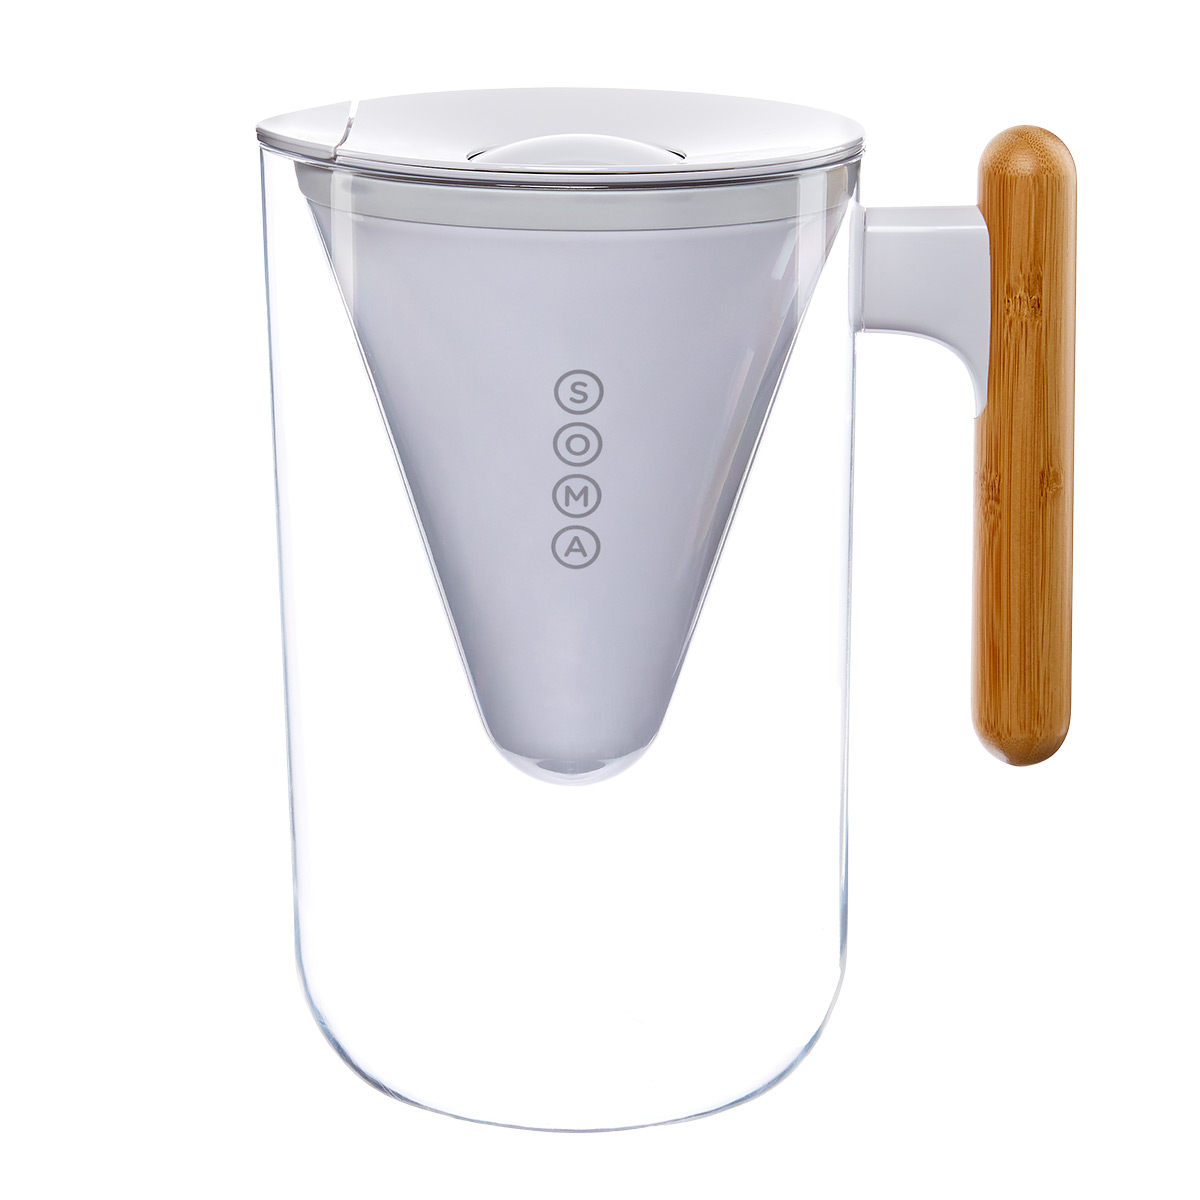 https://www.containerstore.com/catalogimages/402807/10083576_soma_10_cup_filtration_pitc.jpg